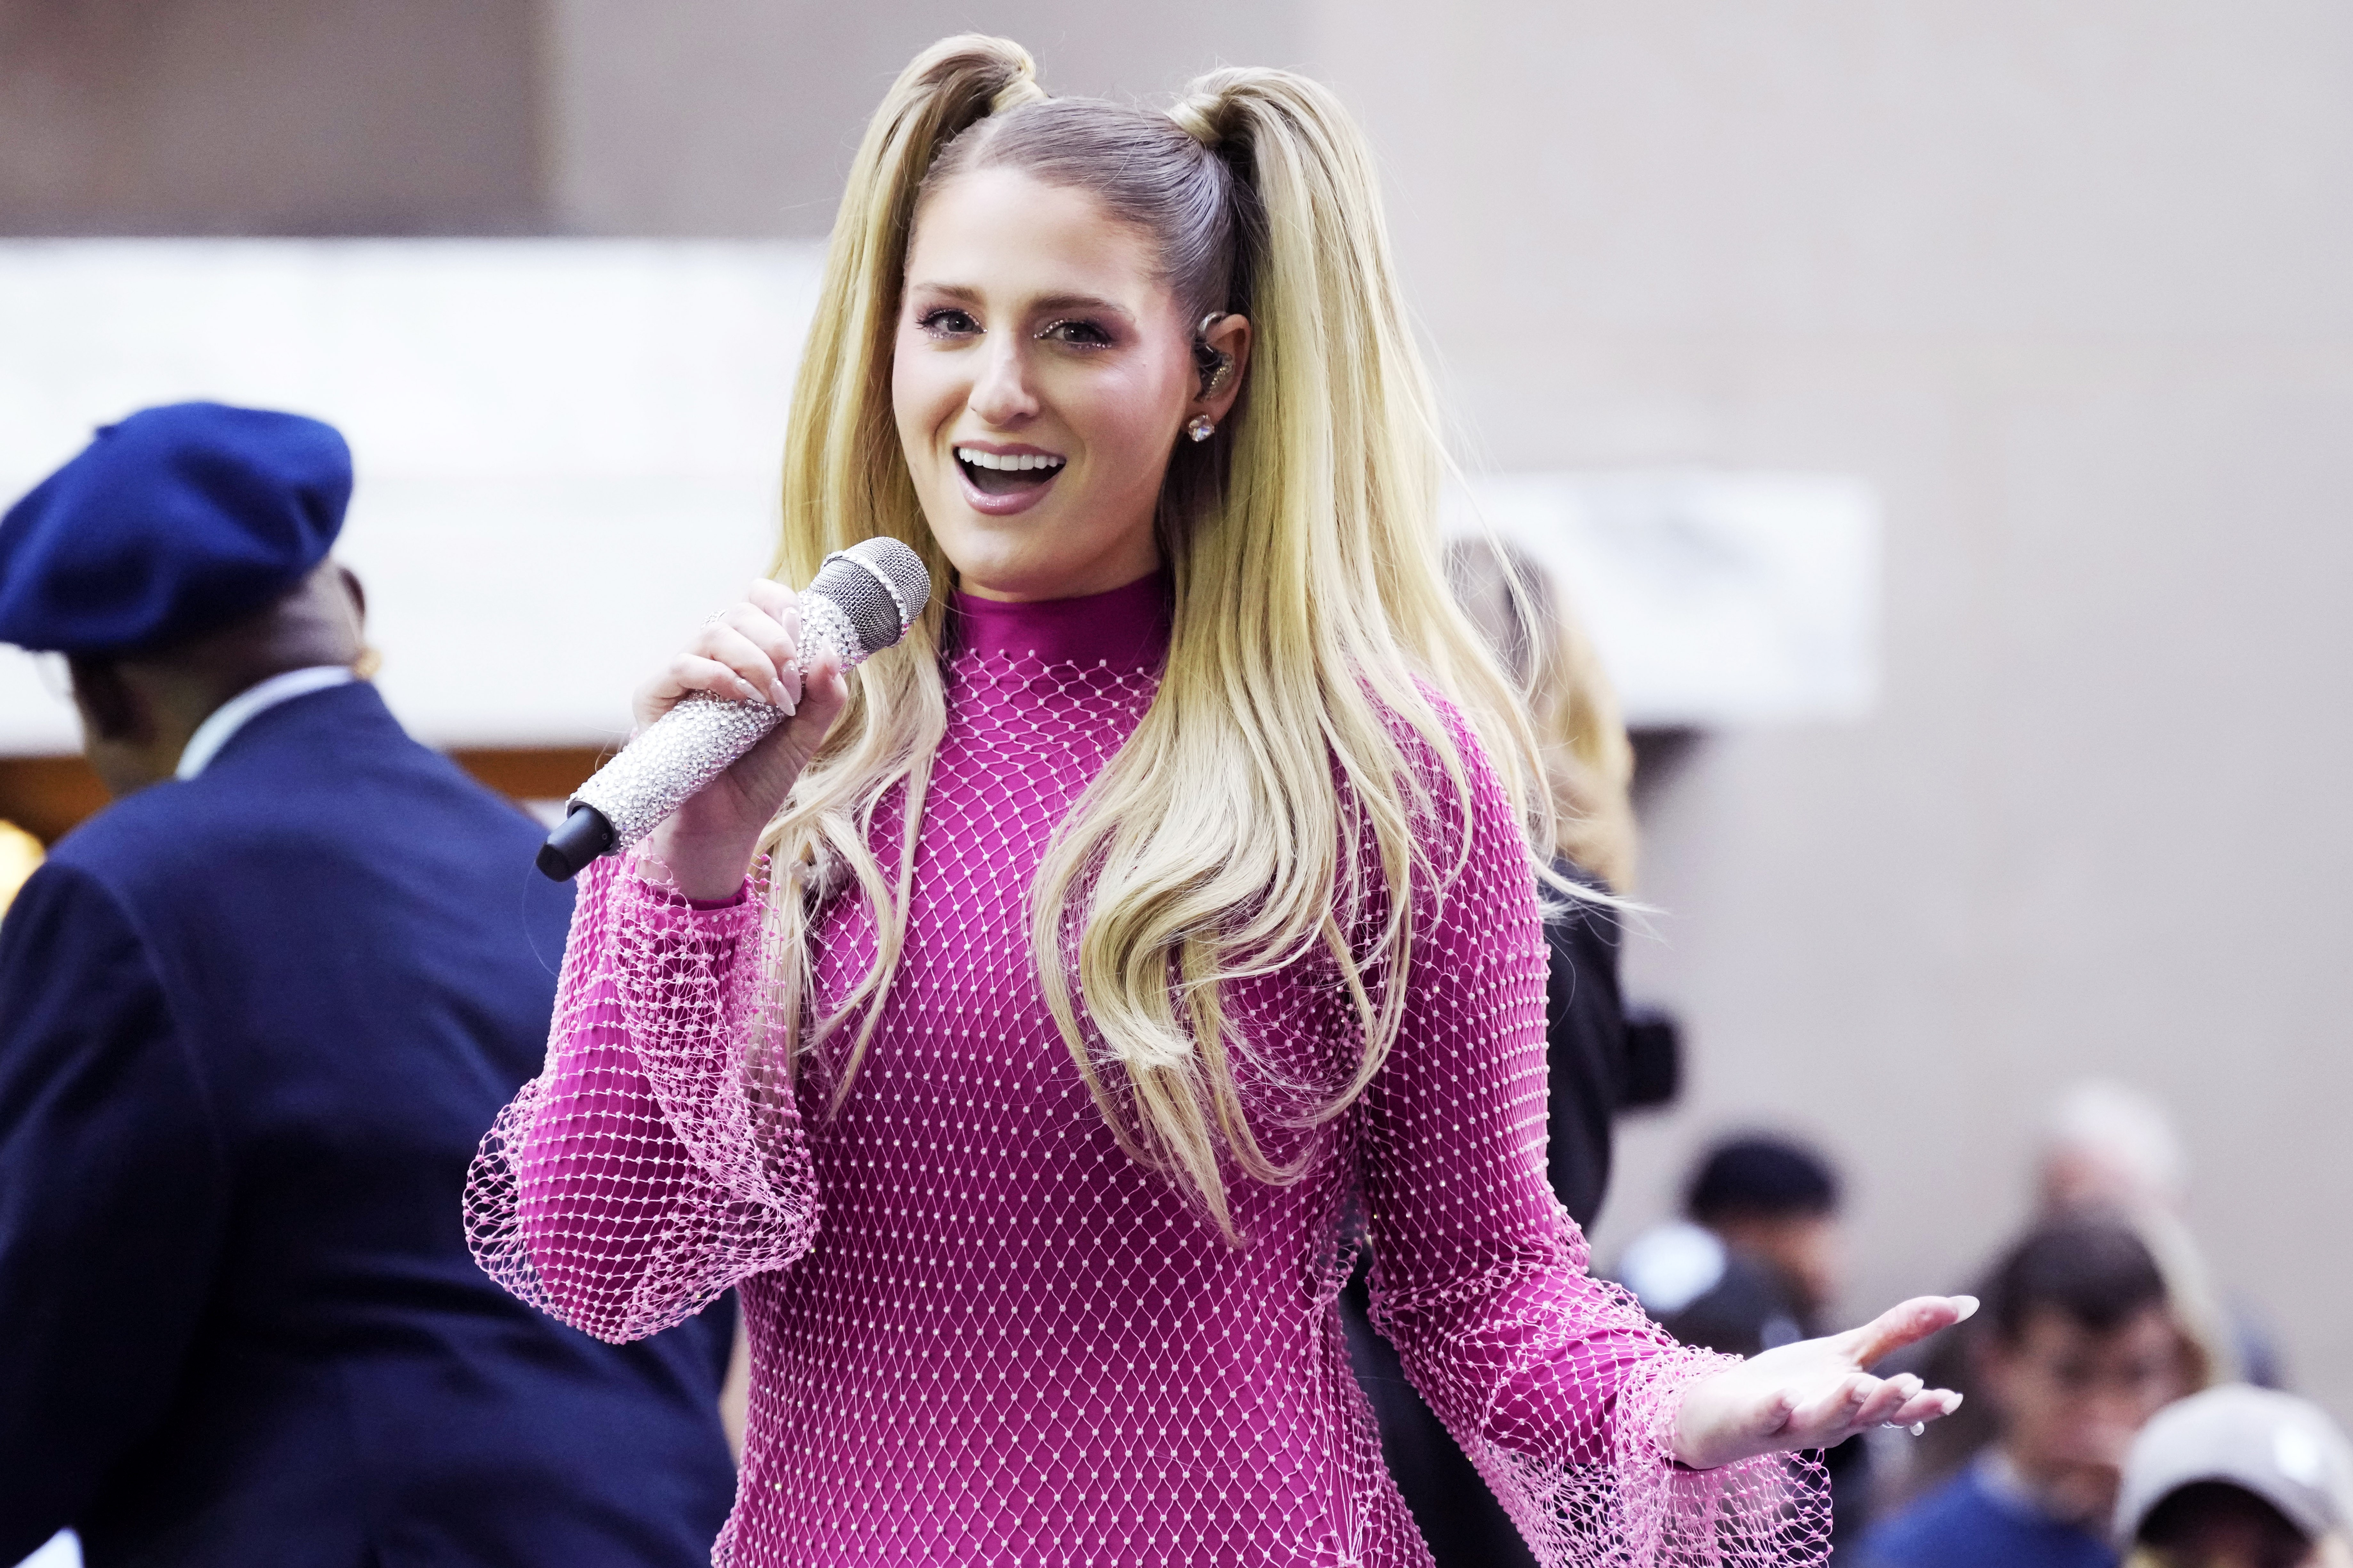 Look: Meghan Trainor releases new album, 'Made You Look' music video 